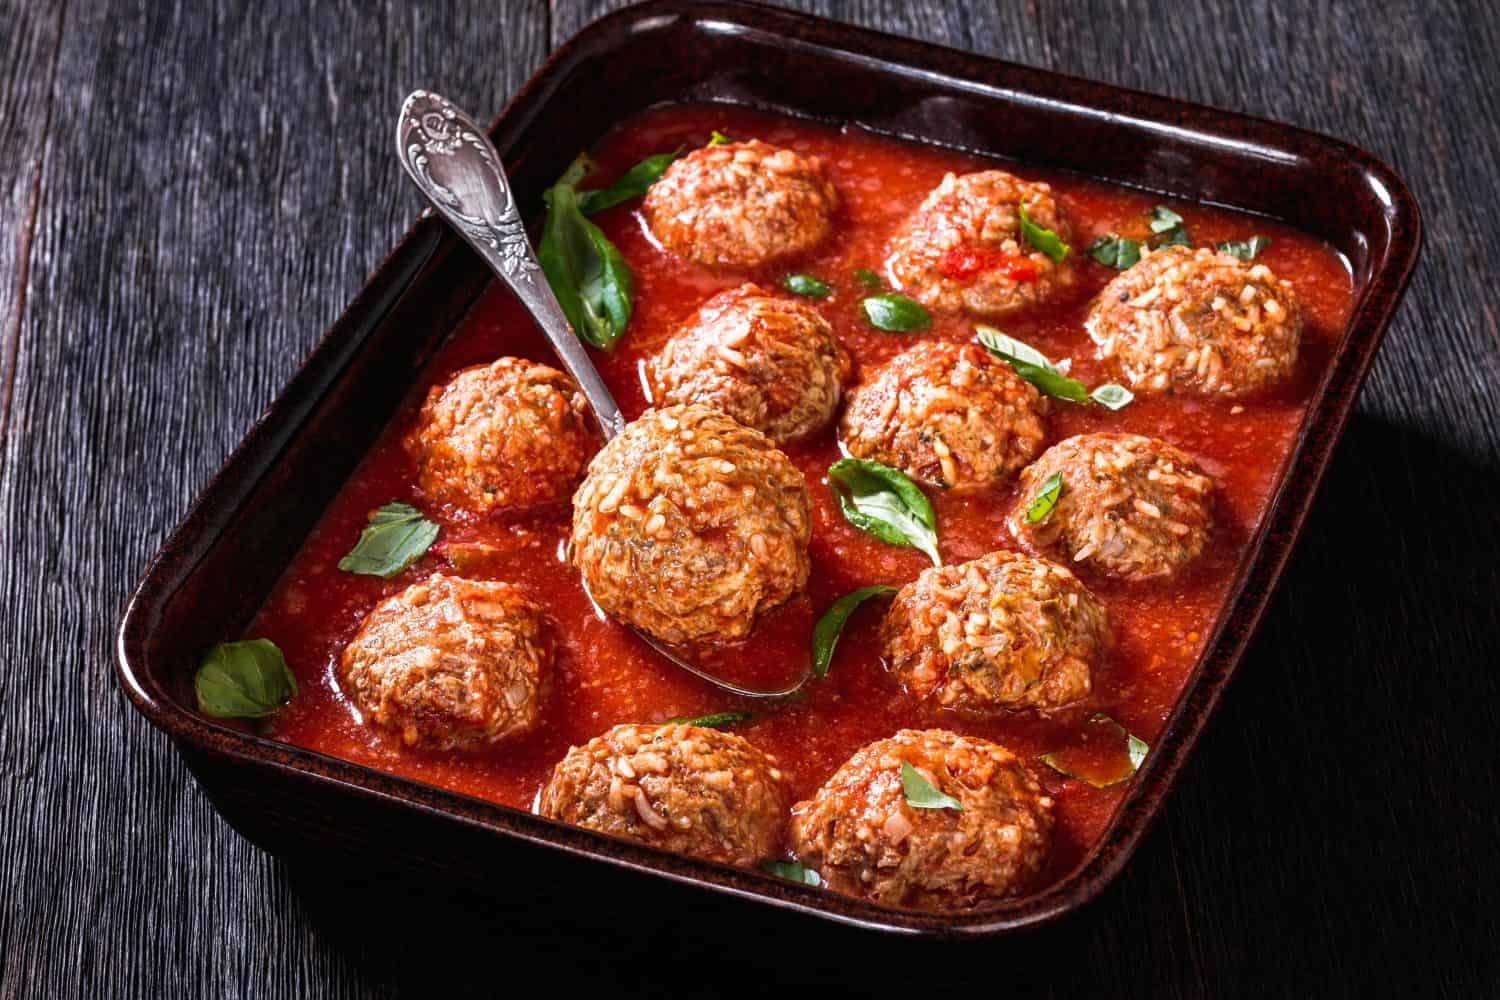 Italian Porcupine Balls, ground beef and rice meatballs in tomato sauce in rustic baking dish on dark wooden table, horizontal view, close-up